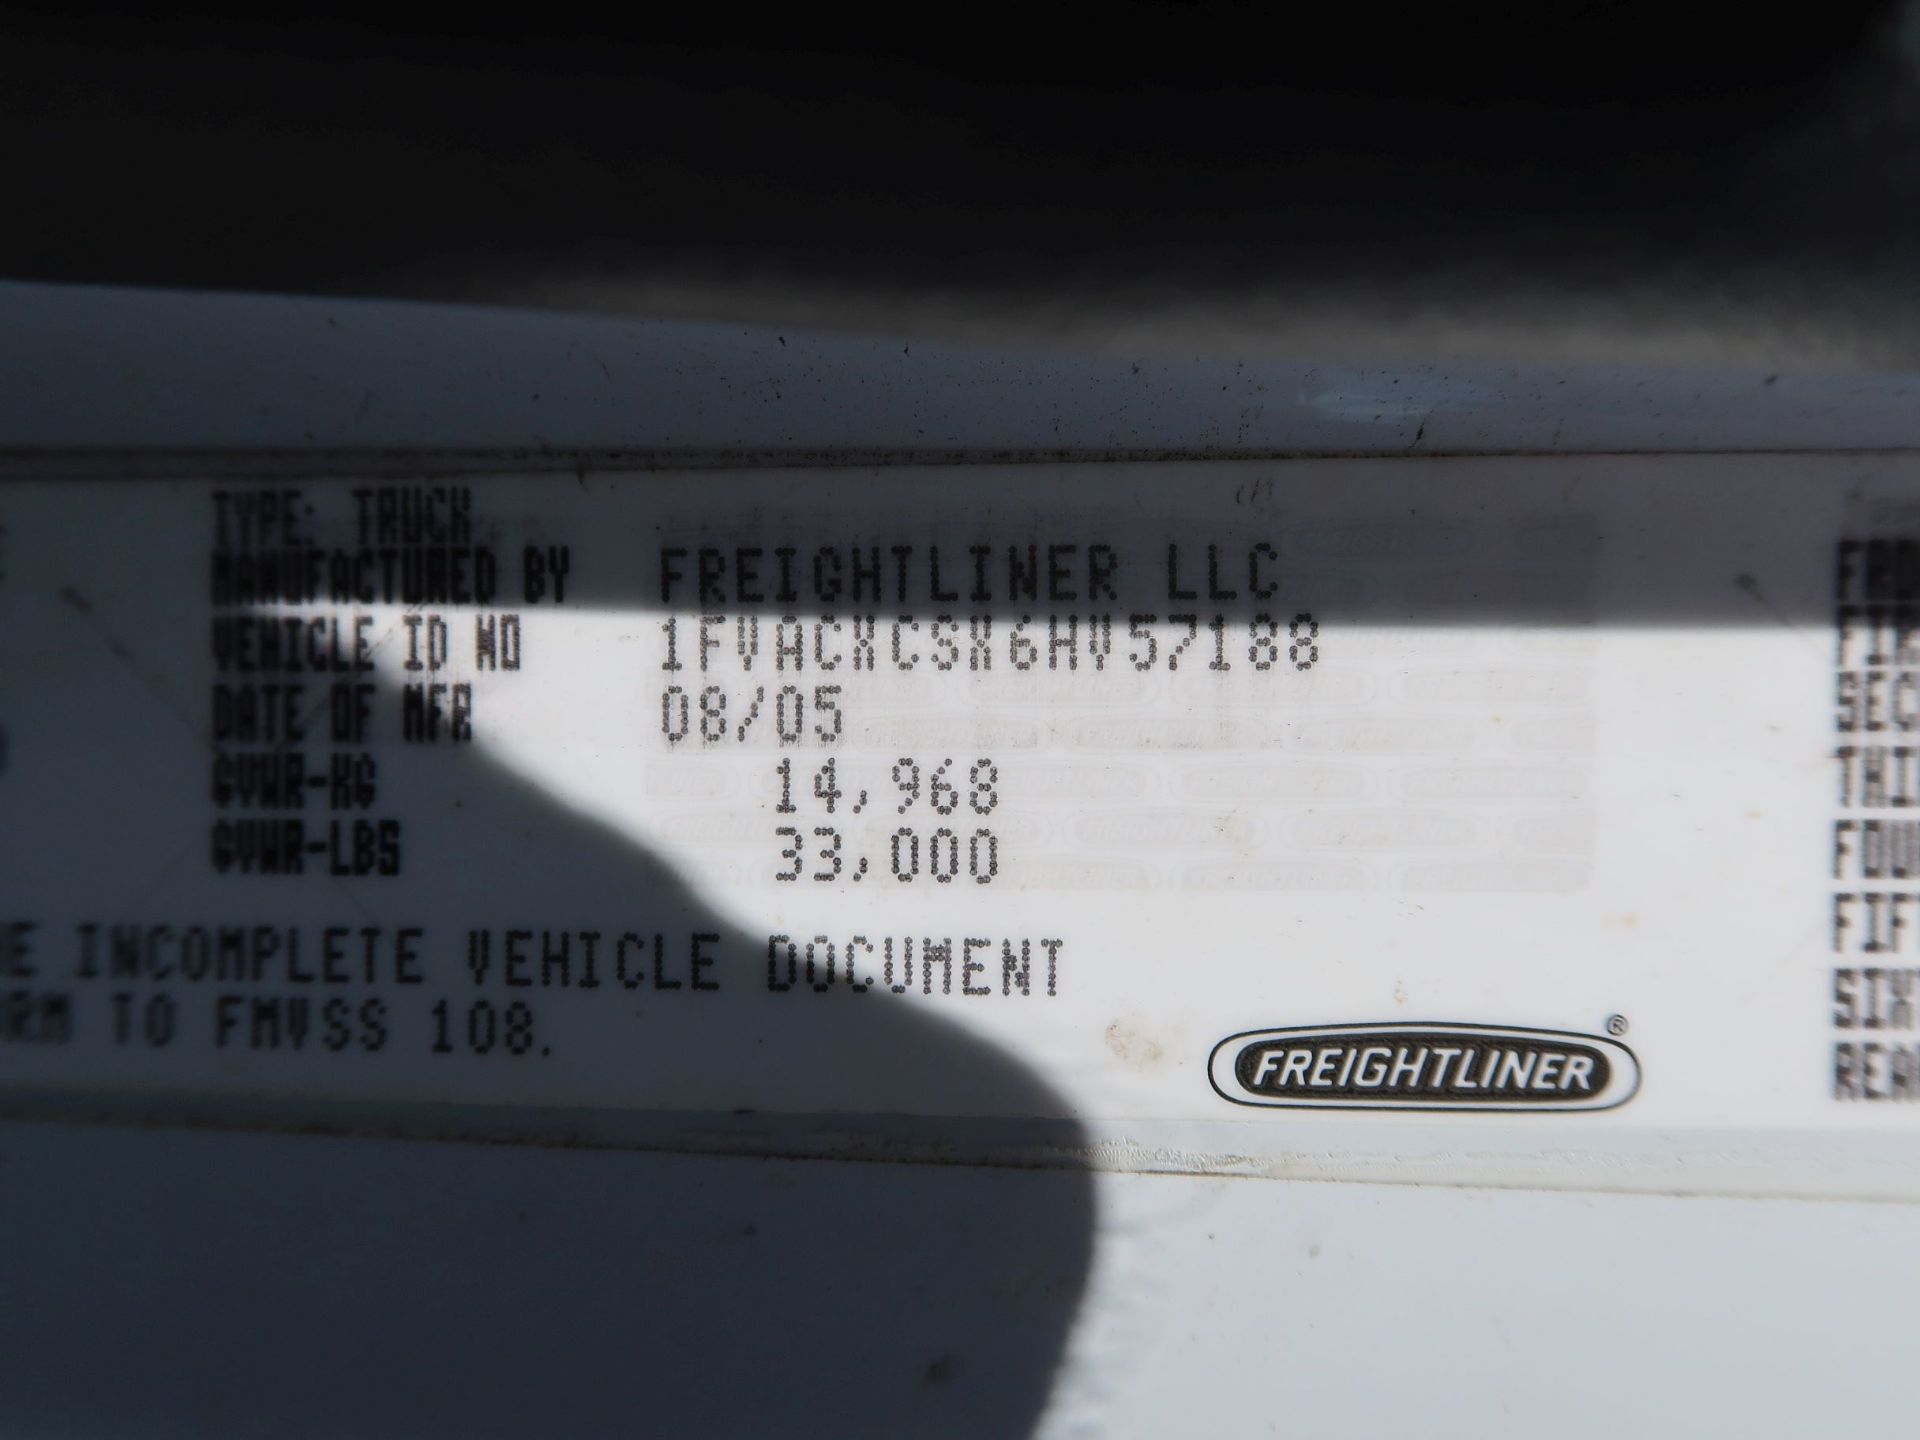 2005 FREIGHTLINER BUSINESS CLASS M2 GASOLINE POWERED TANDEM AXLE 25' BOX TRUCK; VIN # - Image 7 of 7